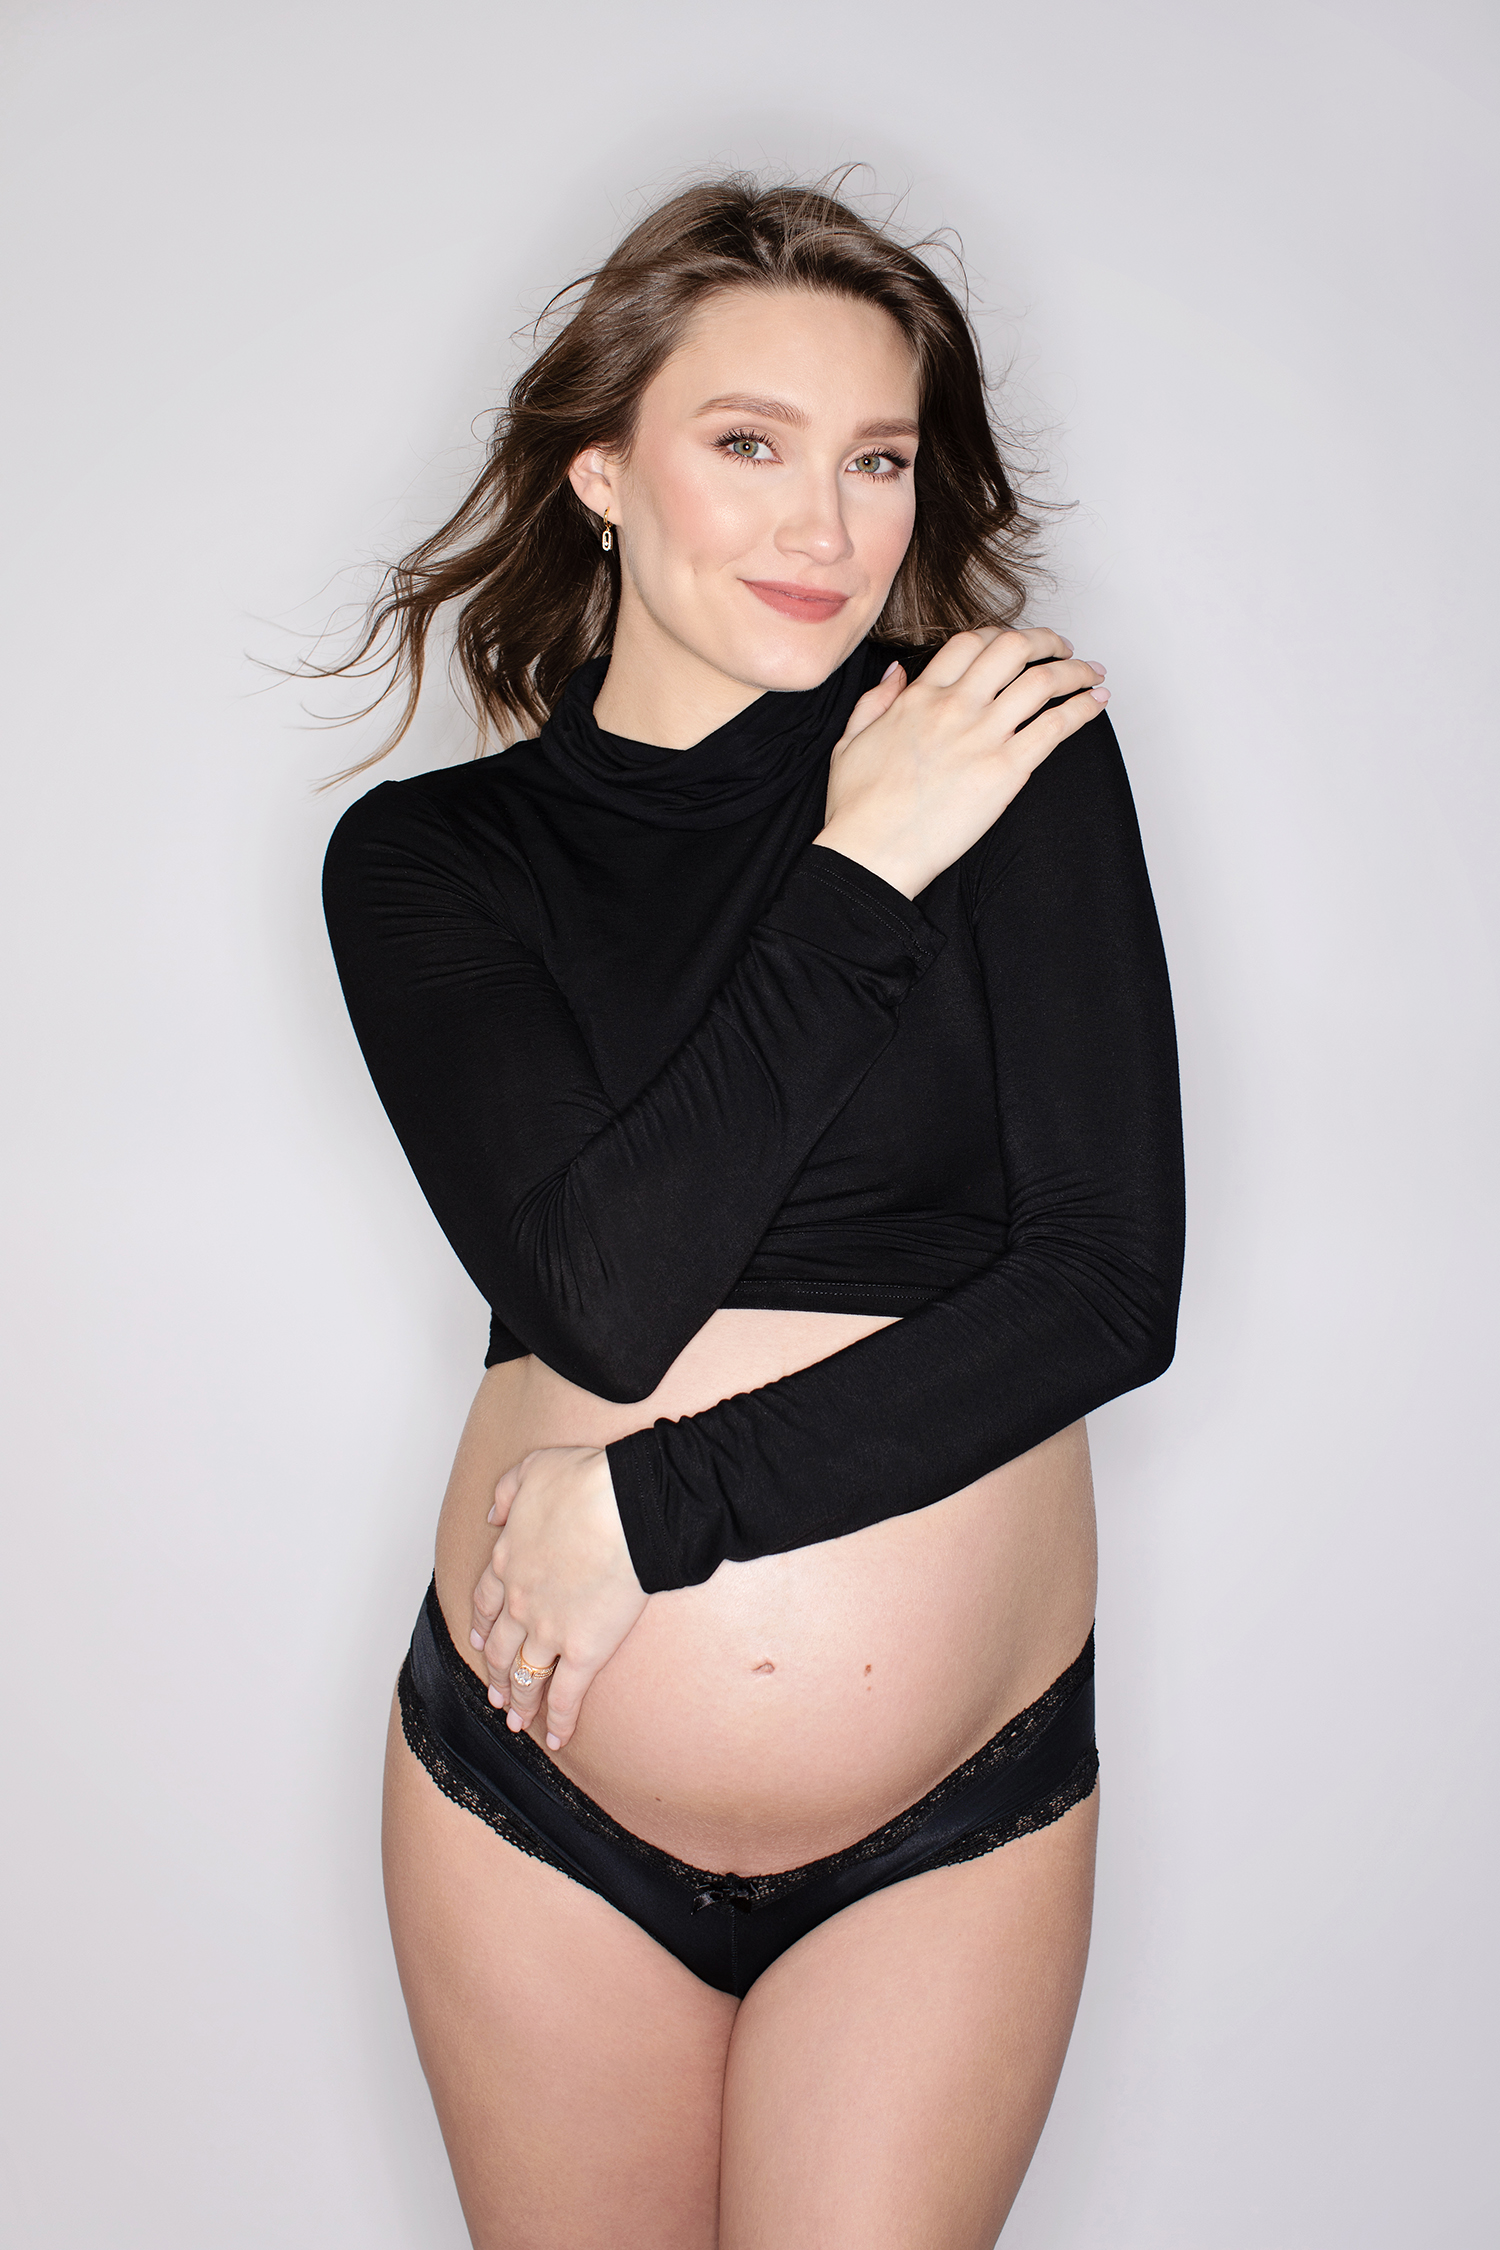 A smiling pregnant woman in a black top.